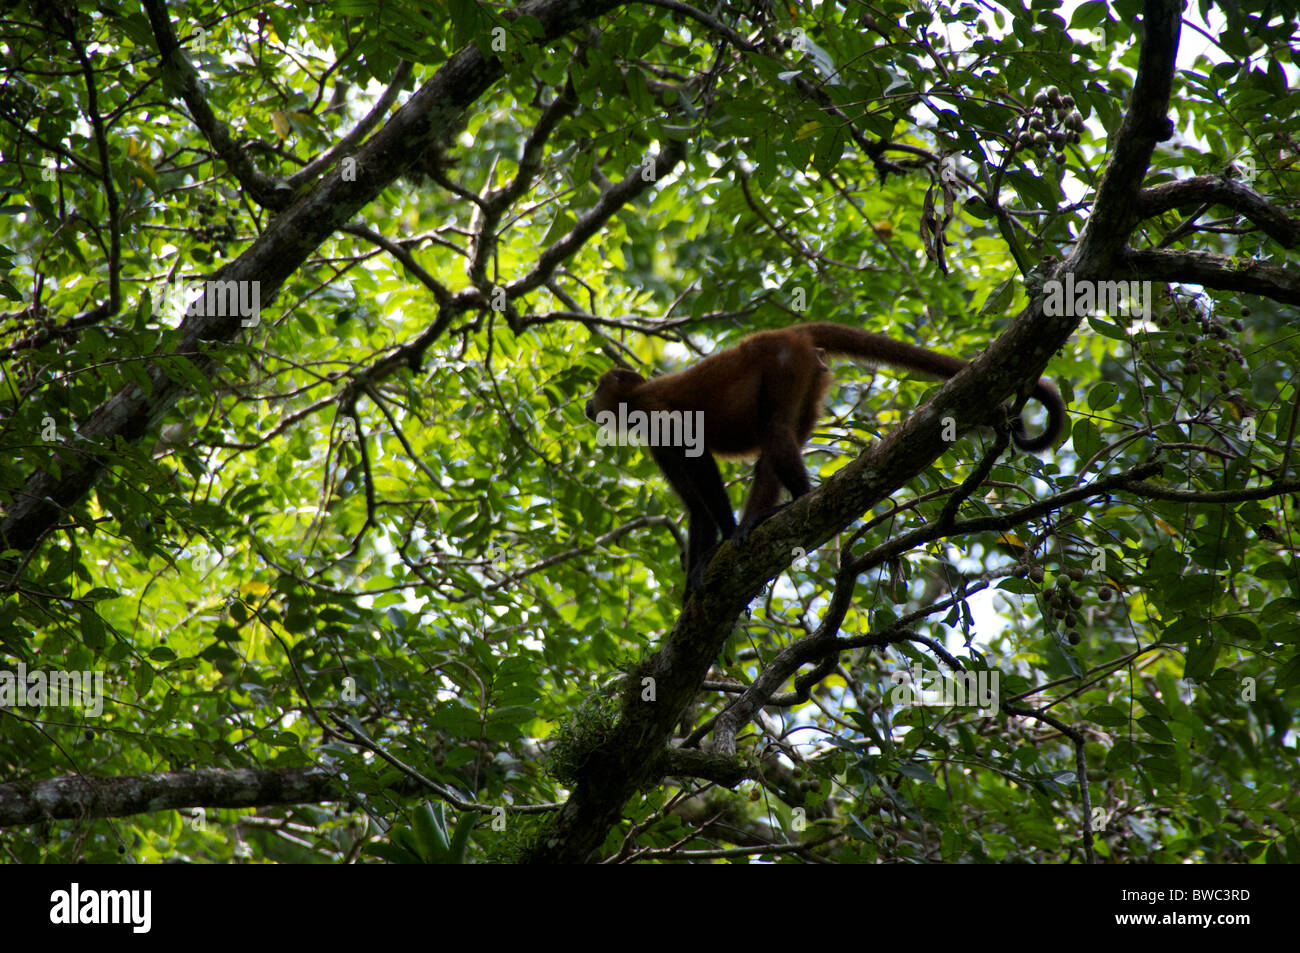 An Ornate Spider Monkey (Ateles geoffroyi ornatus) high in a tree at Tortuguero National Park, Costa Rica. Stock Photo